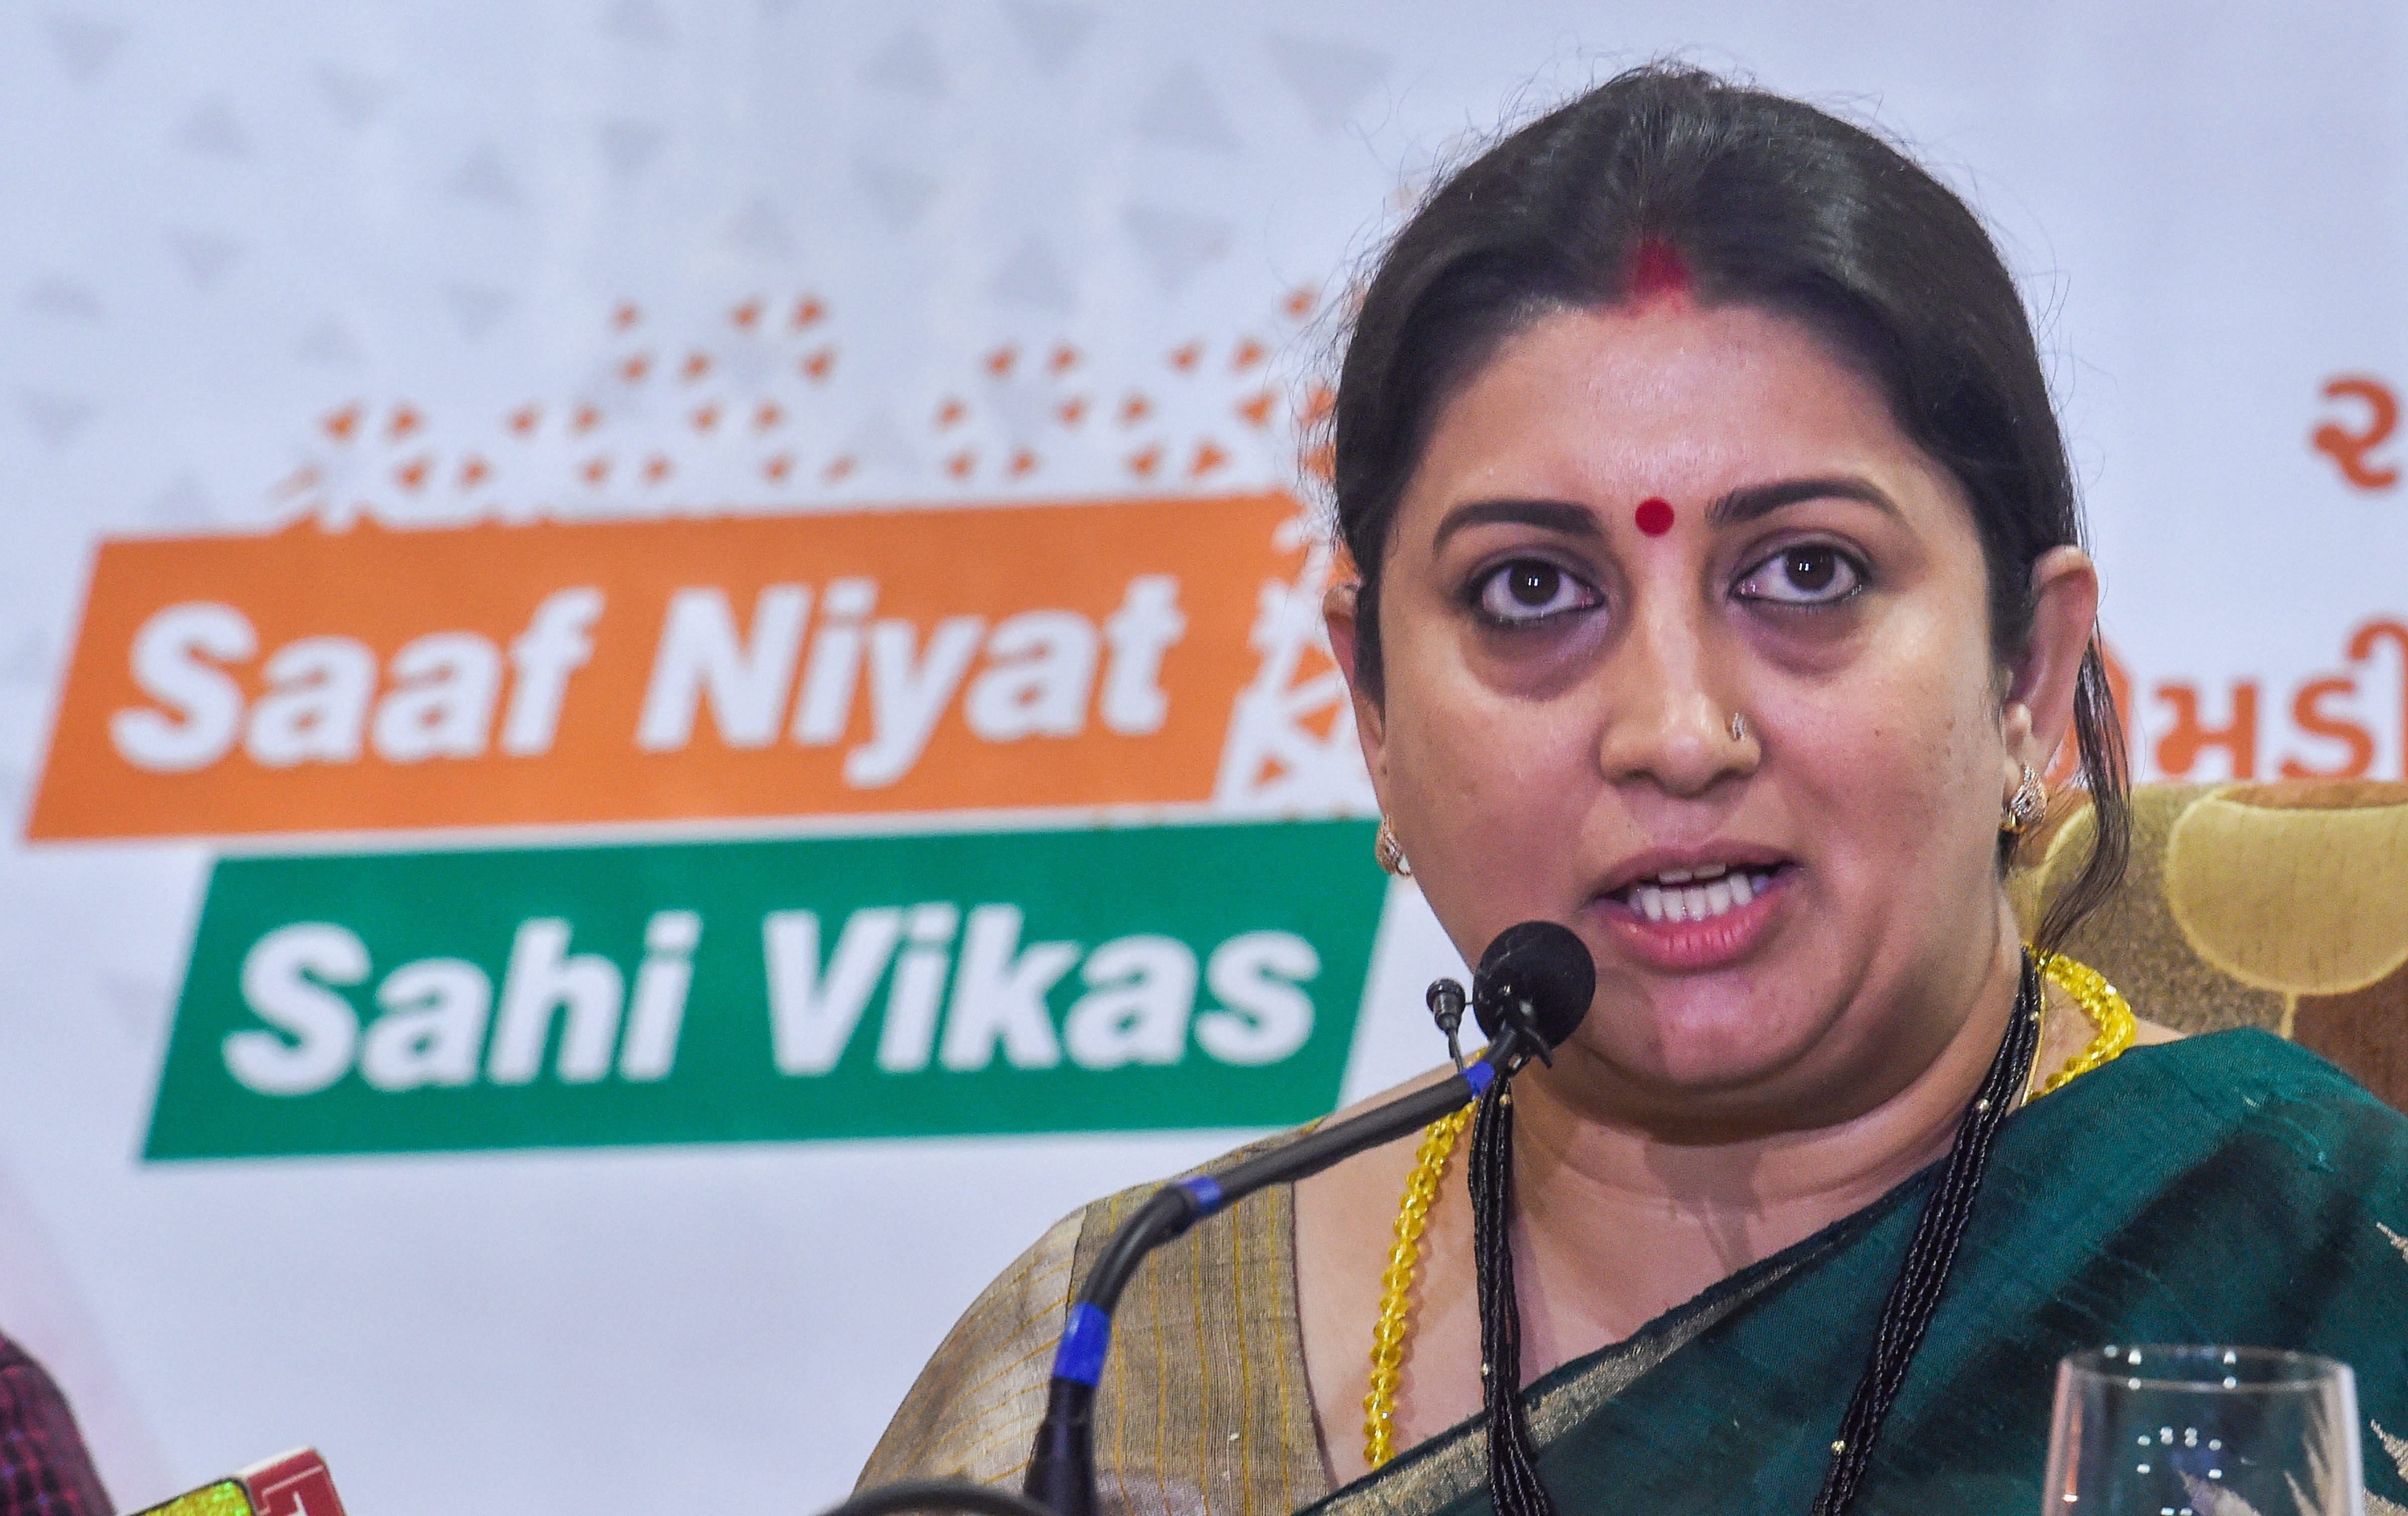 Smriti Irani recently stoked a controversy after she said while responding to a question on Sabarimala temple row at an event in Mumbai, that the right to pray did not mean the right to desecrate. PTI file photo